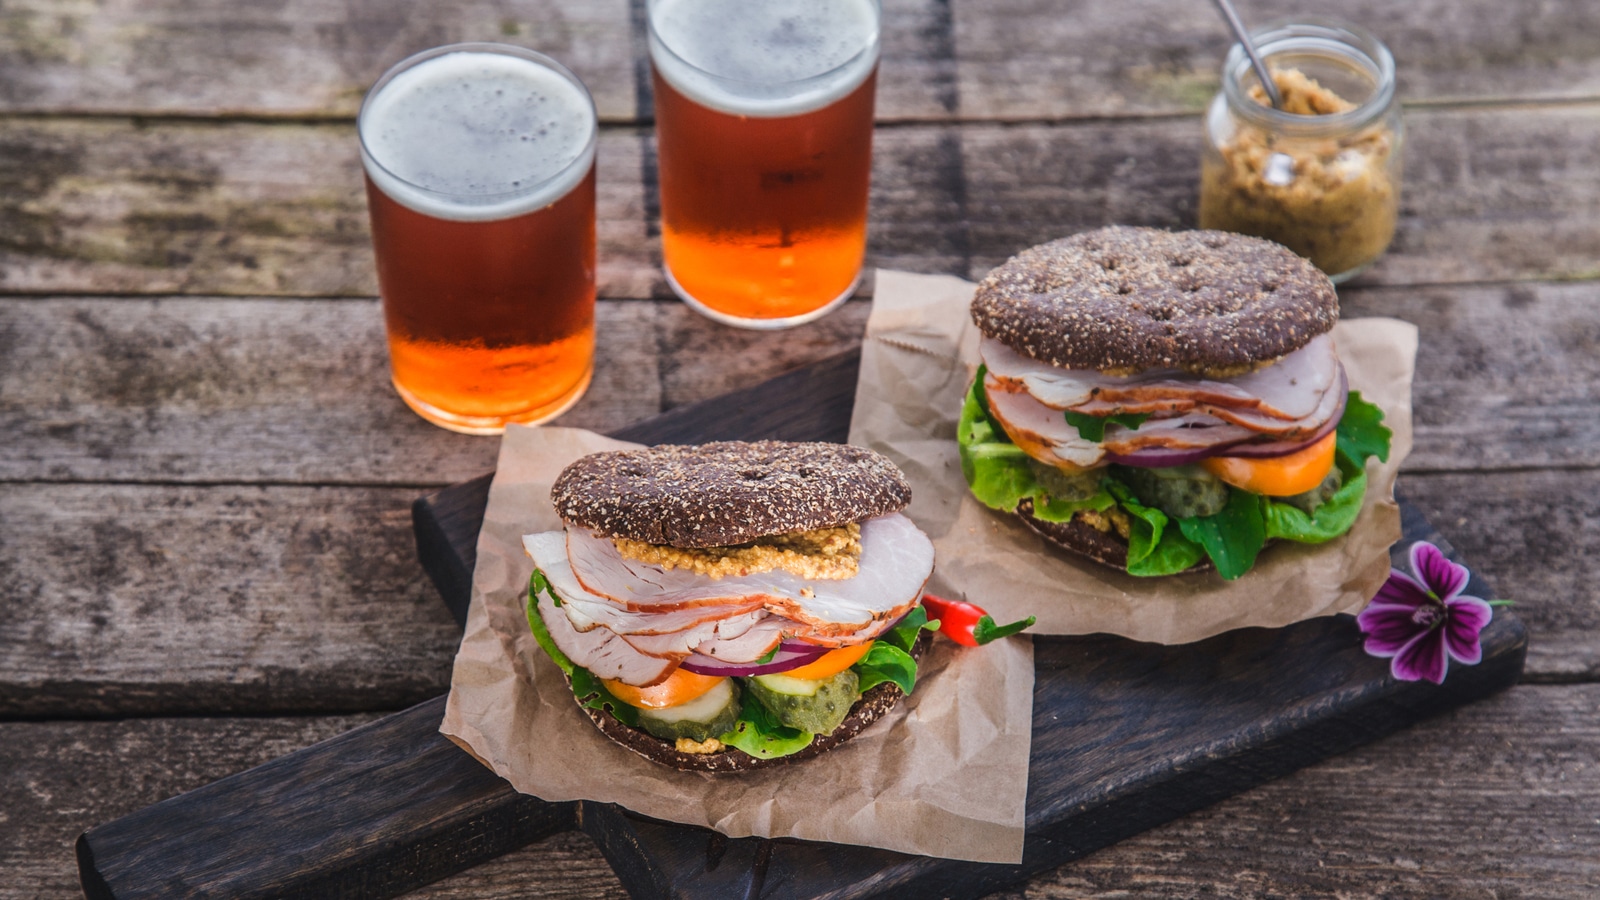 Sandwiches And Good Craft Beer Selection At Brooklyn Gourmet Deli